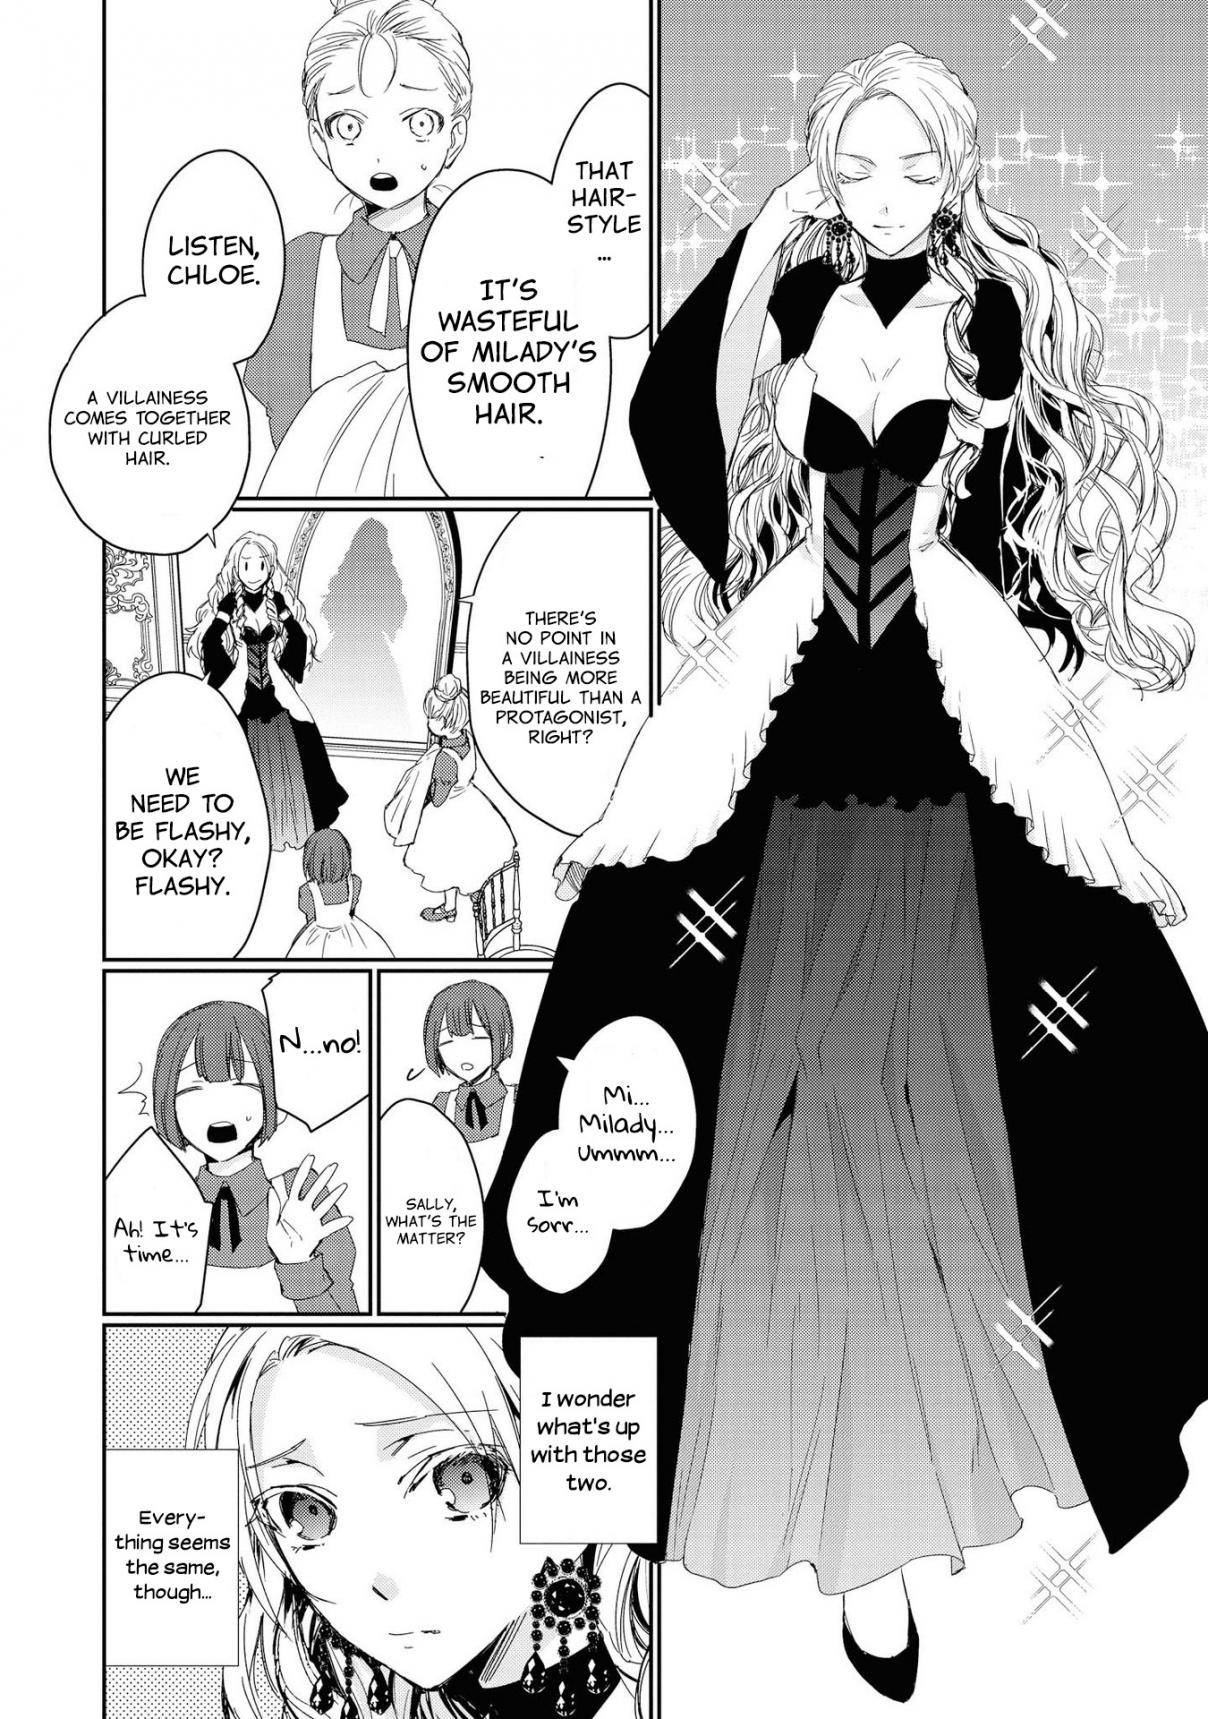 Though I May Be a Villainess, I'll Show You I Can Obtain Happiness! Vol. 1 Ch. 3 I Will Definitely Get My Engagement Annulled! ~I will become a Villainess!